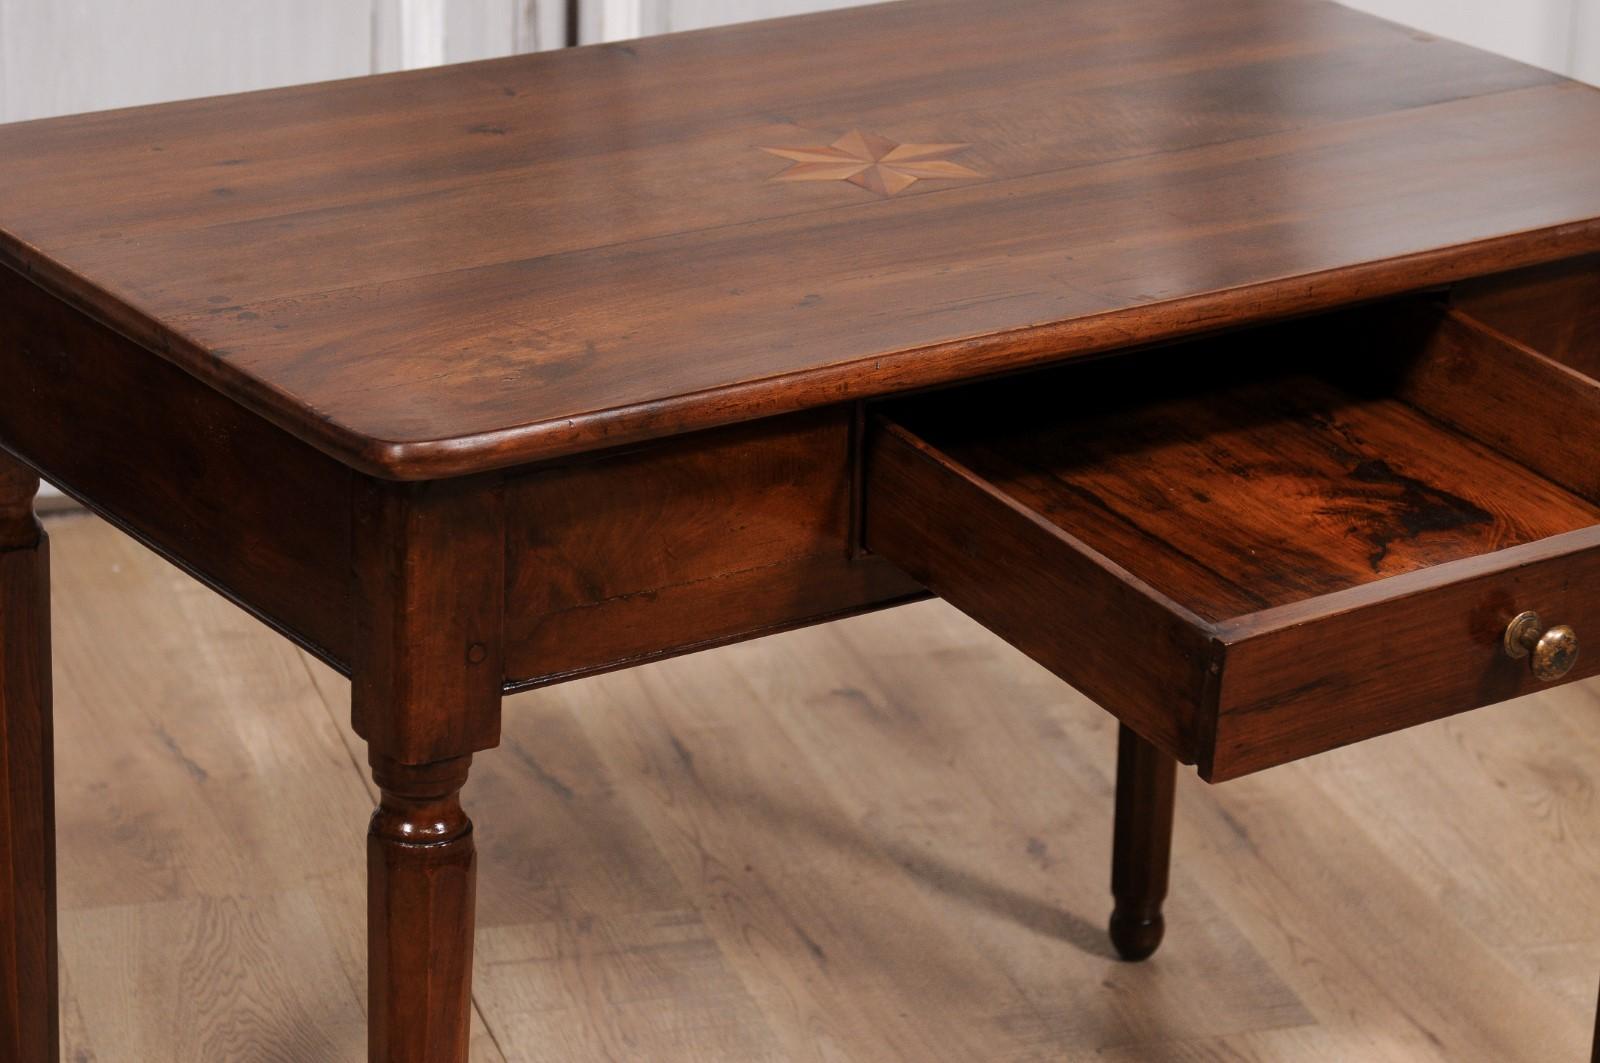 19th Century Italian 1890s Walnut Side Table with Elm Marquetry Star, Drawer and Turned Legs For Sale